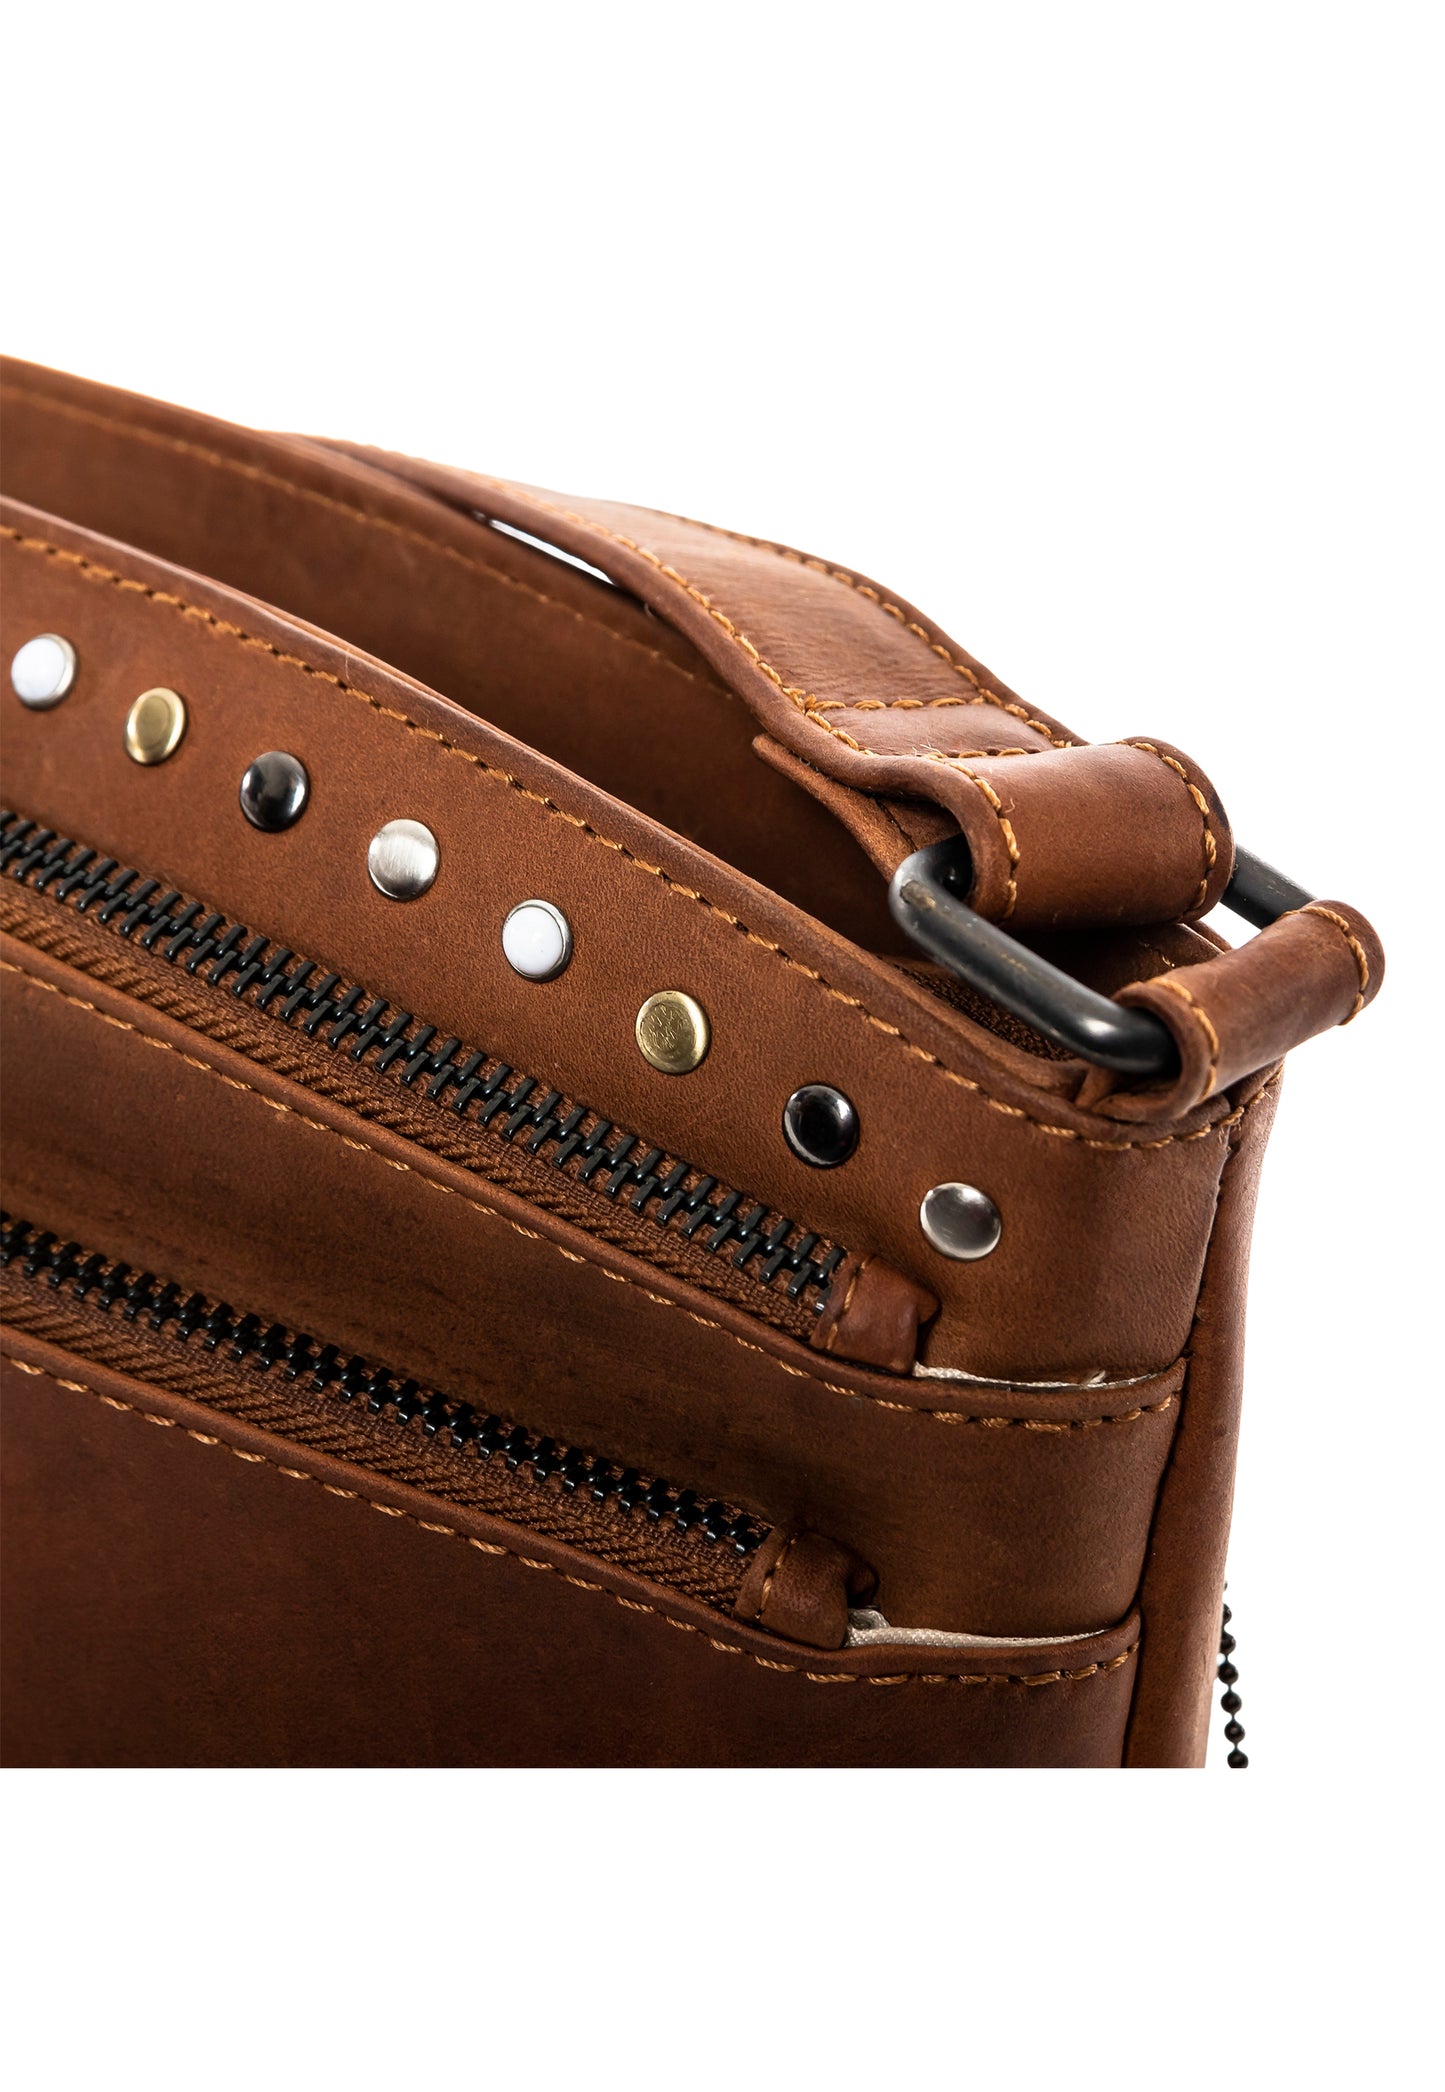 Closeup detail of leather concealed carry handbag